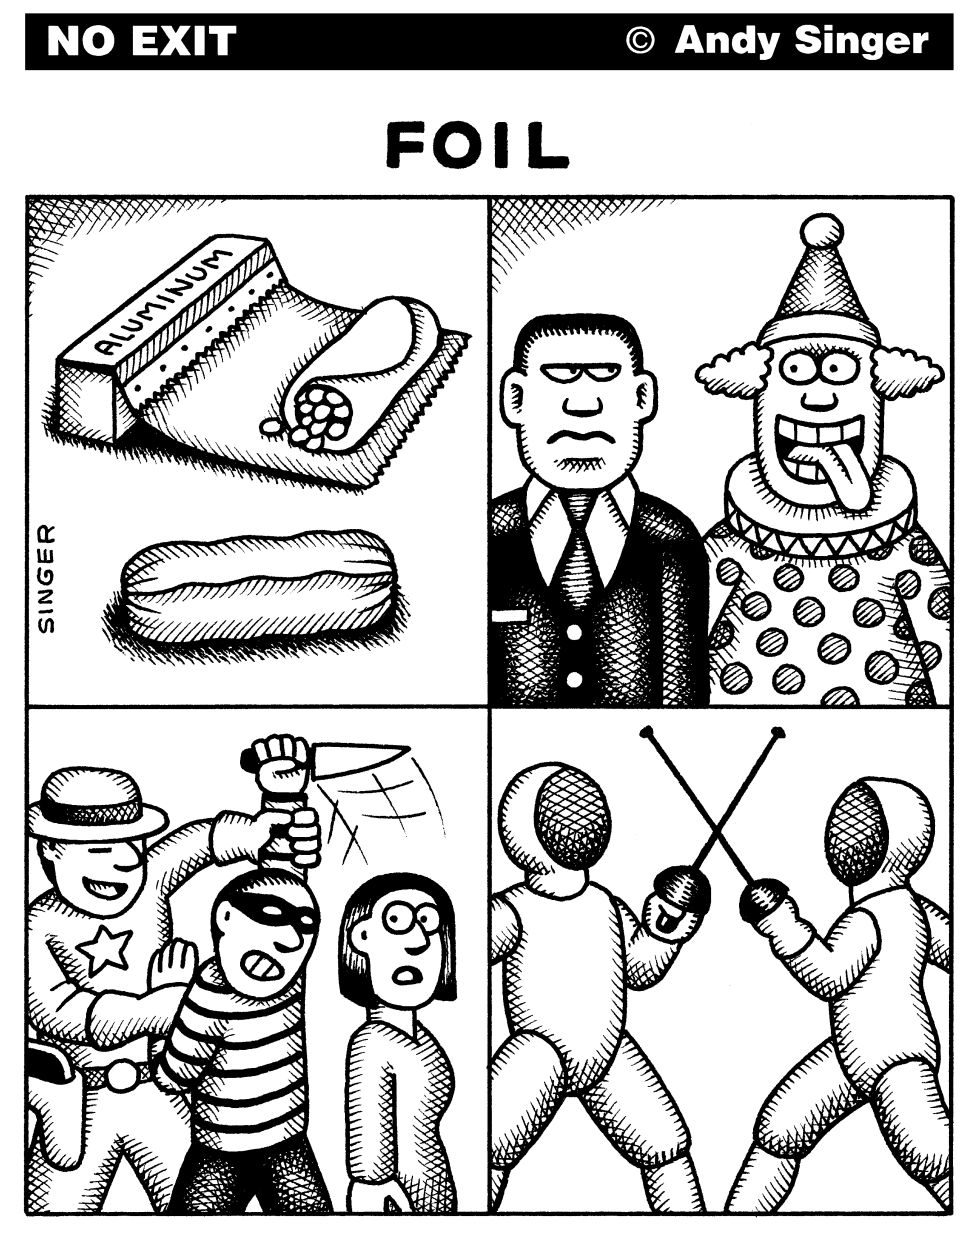 FOIL by Andy Singer